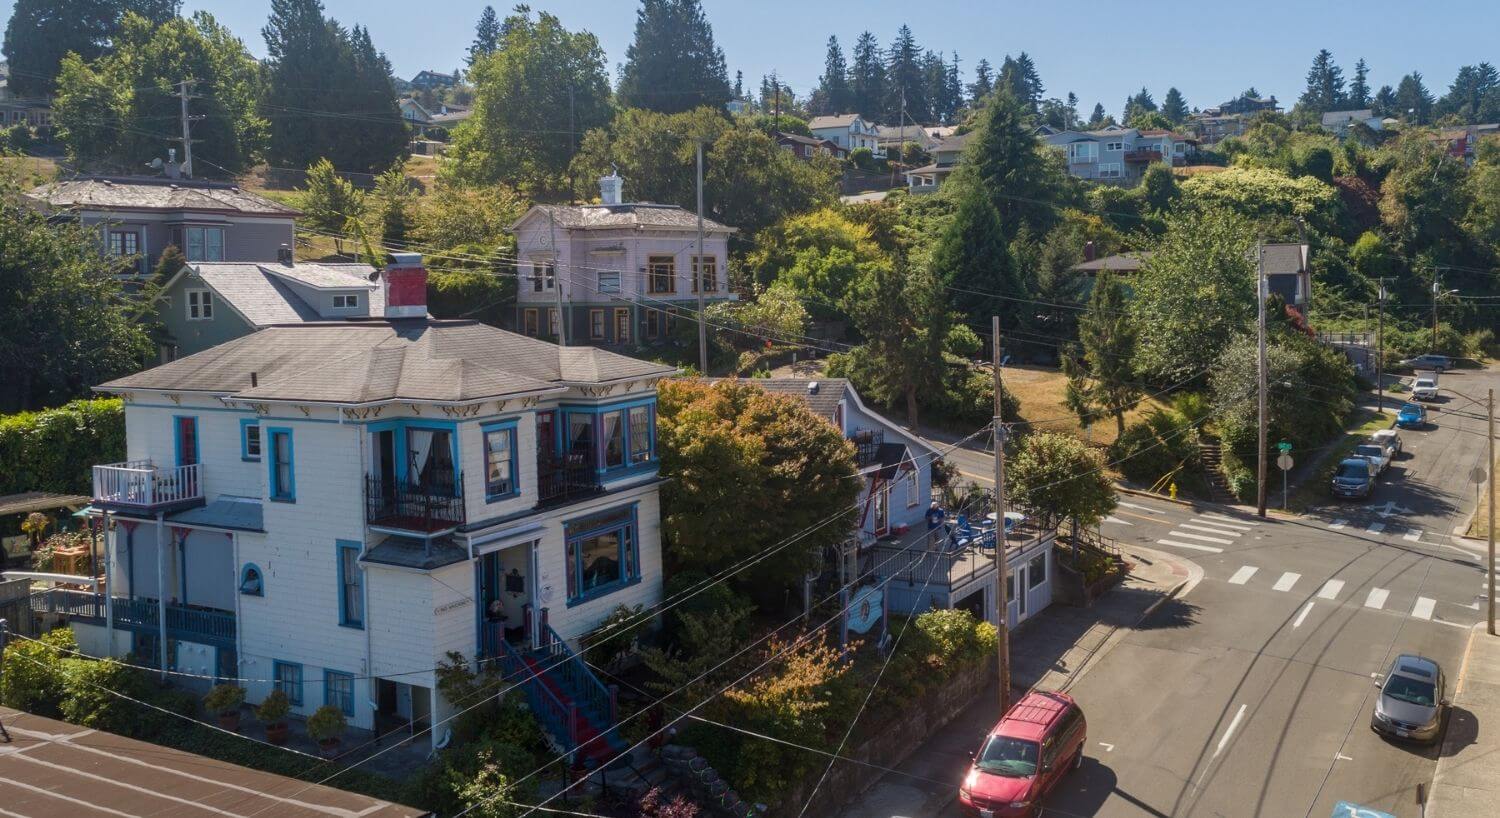 Arial view of large Italianate-style home - white with blue trim